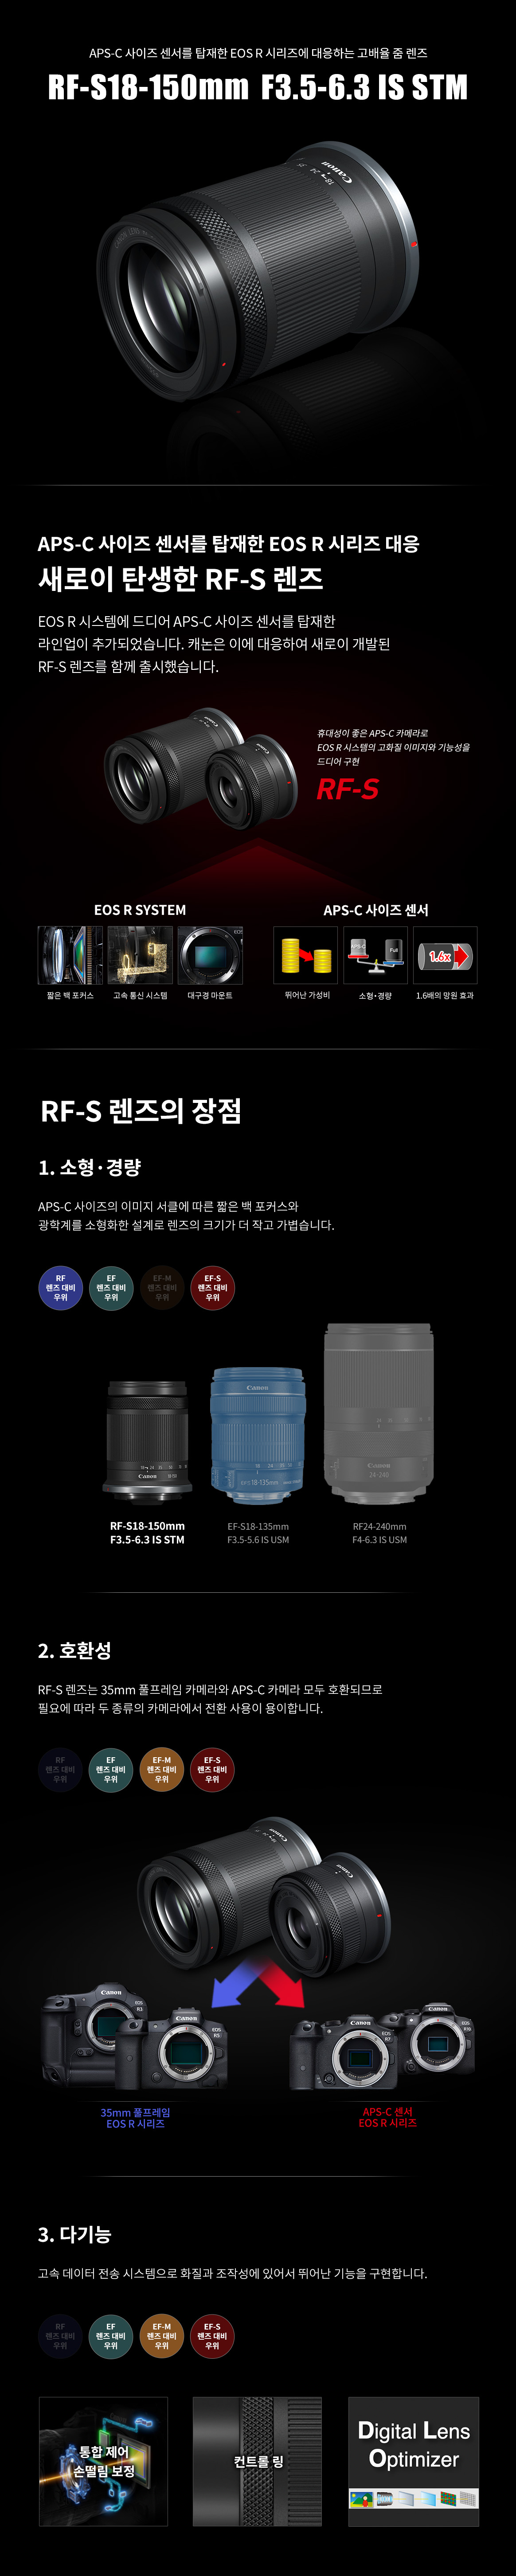 RF-S18-150mm F3.5 6.3 IS STM